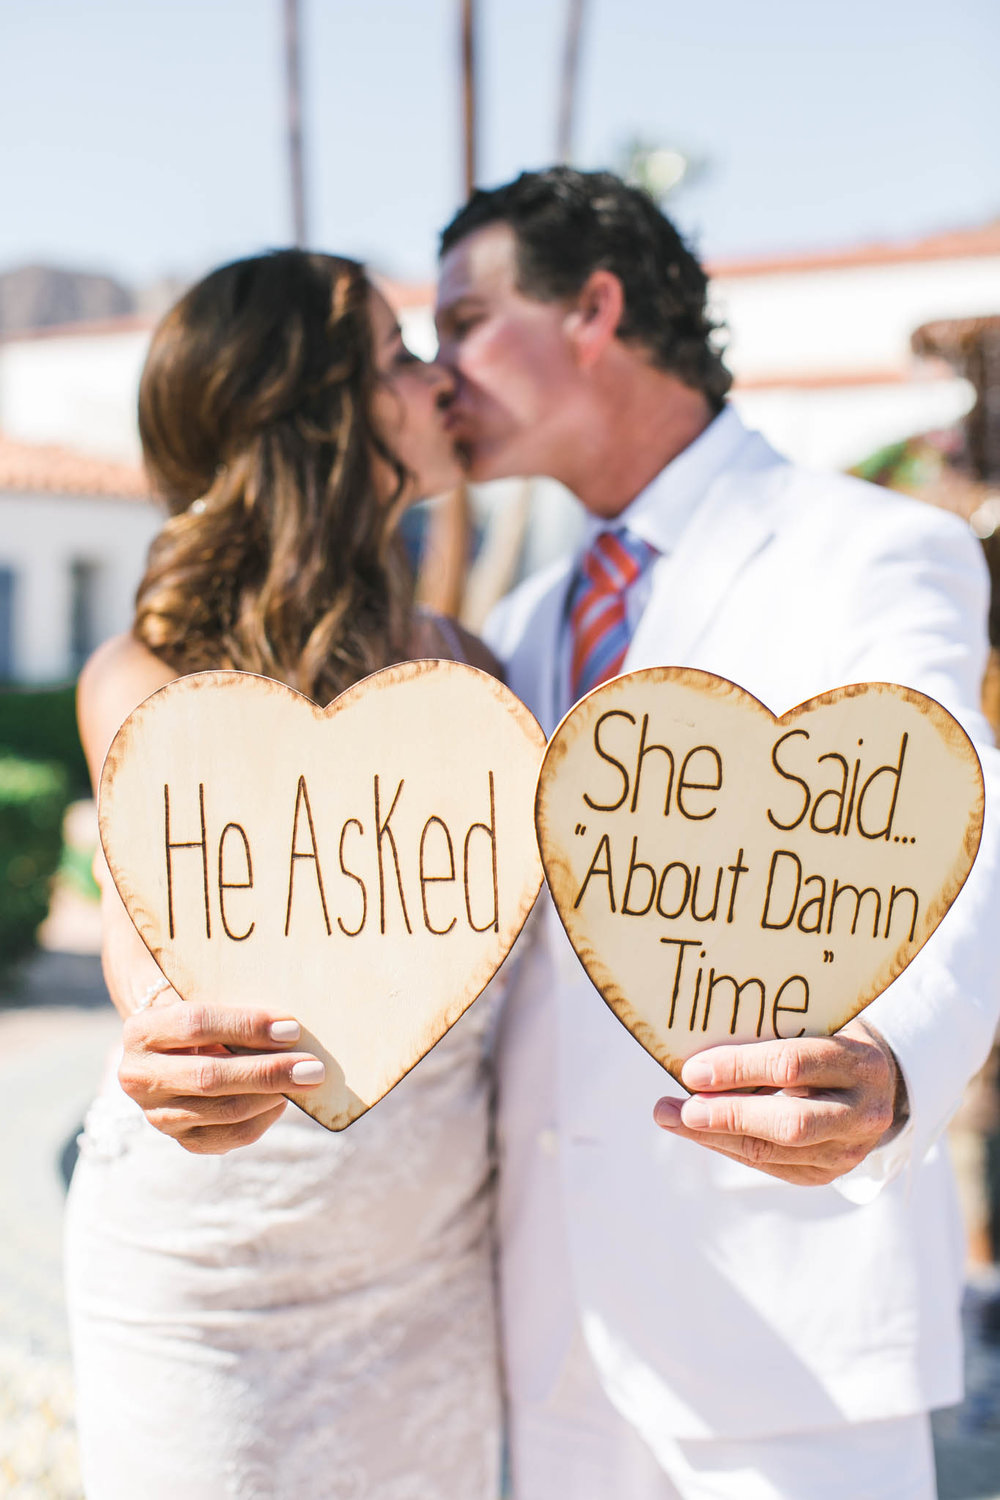 He asked, she said about damn time wedding photos